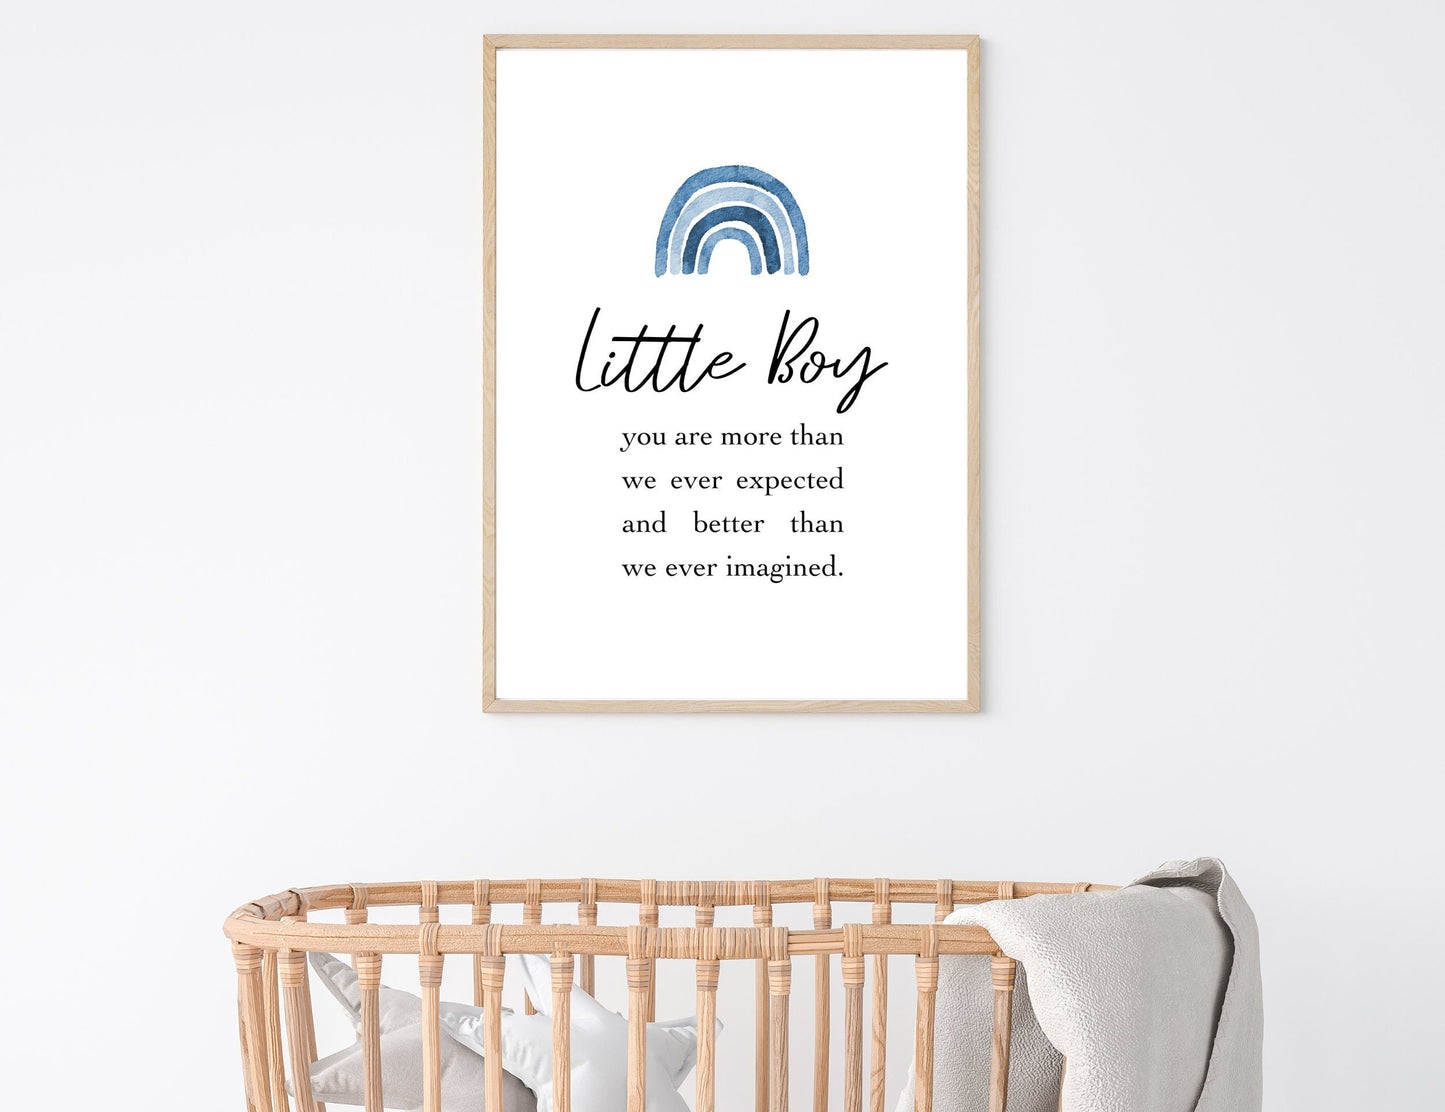 A picture showing a digital poster hung on the wall above a cradle. The digital poster has a blue rainbow, with a piece of writing that says: “Little boy, you are more than we ever expected and better than we ever imagined.”